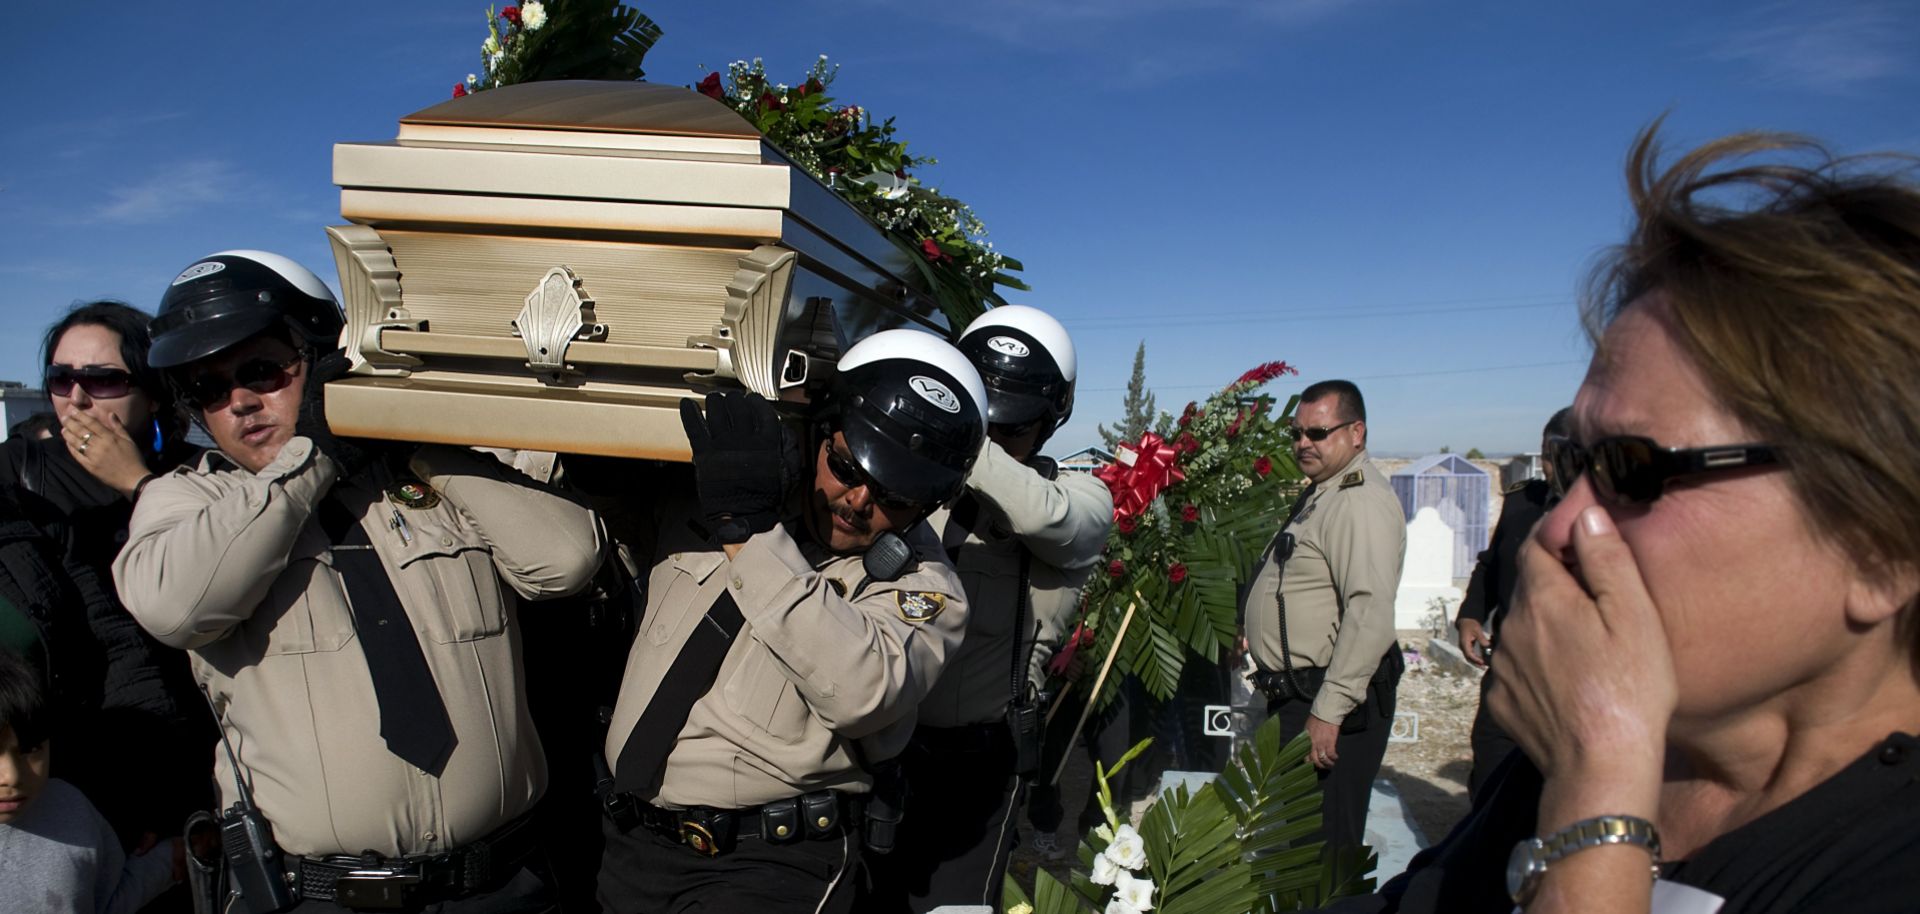 The casket of murdered police officer David Miranda Ramirez, 36, is carried by fellow police at his funeral in Juarez on Nov. 13, 2008.